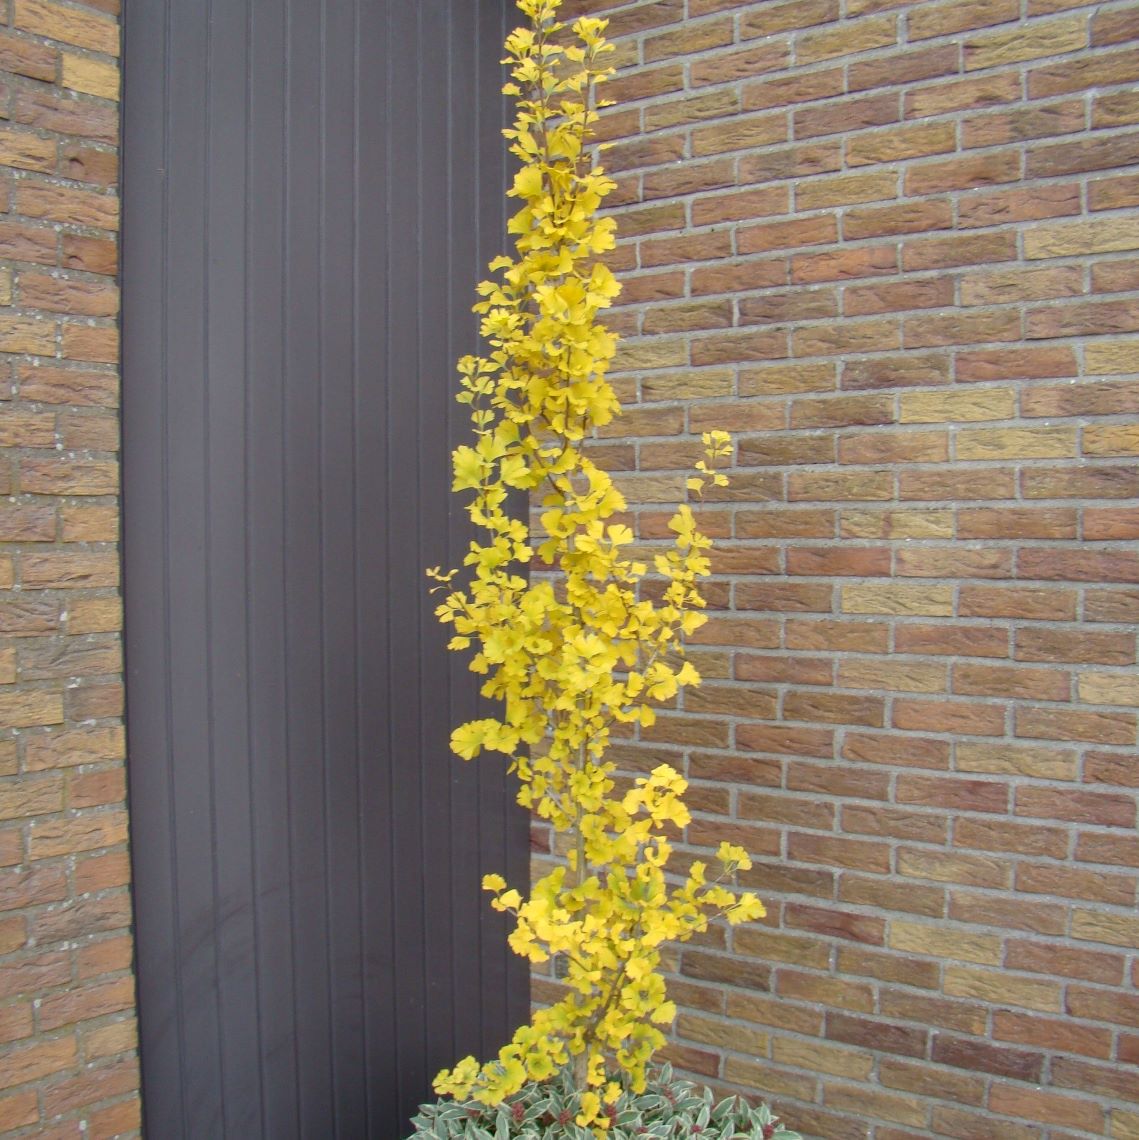 Bright yellow foliage on Skinny Fit ginkgo in fall, planted in container against brick wall.